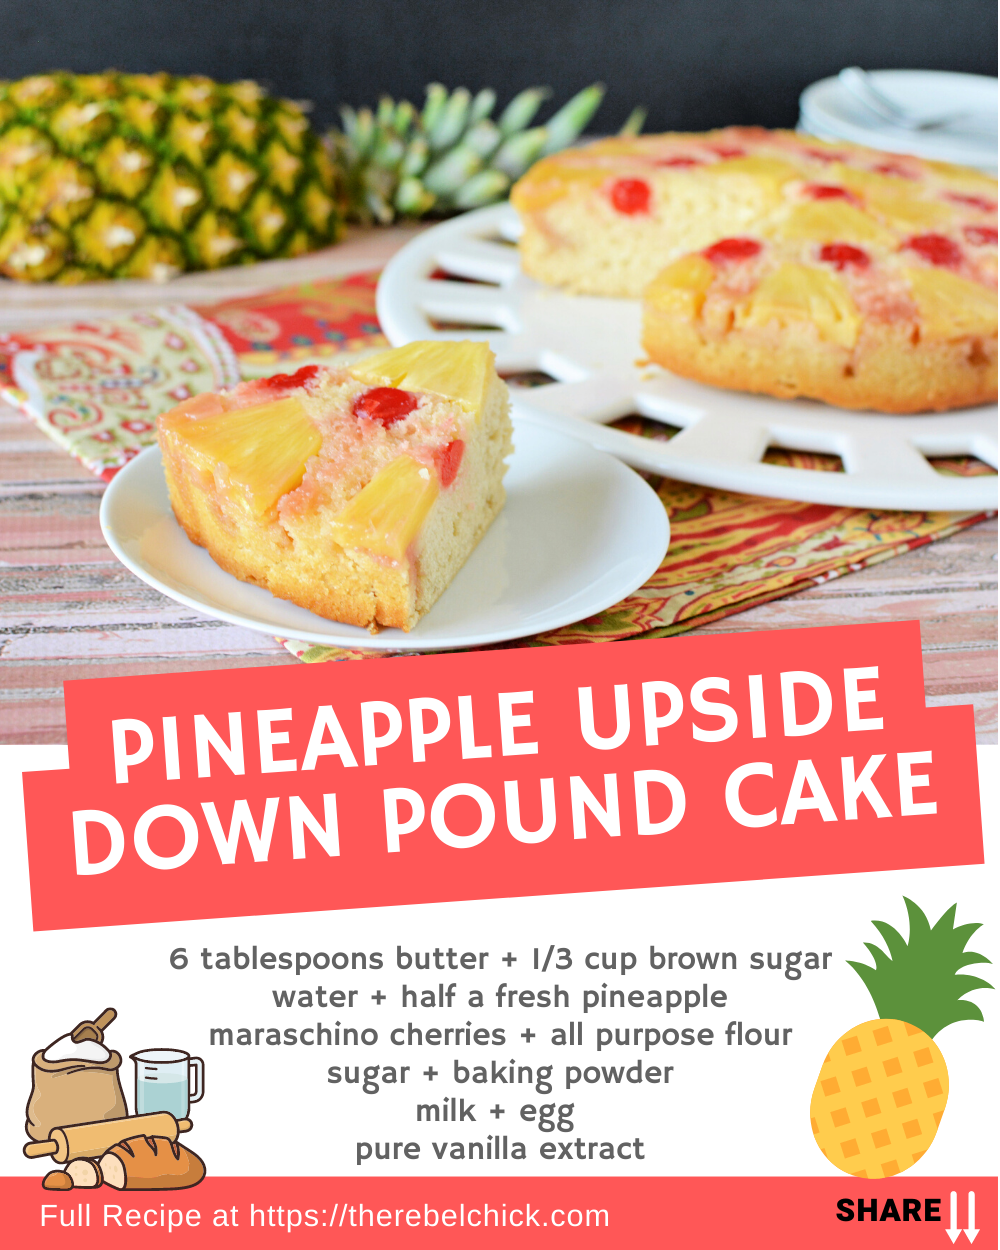 Pineapple Upside Down Pound Cake - The Rebel Chick